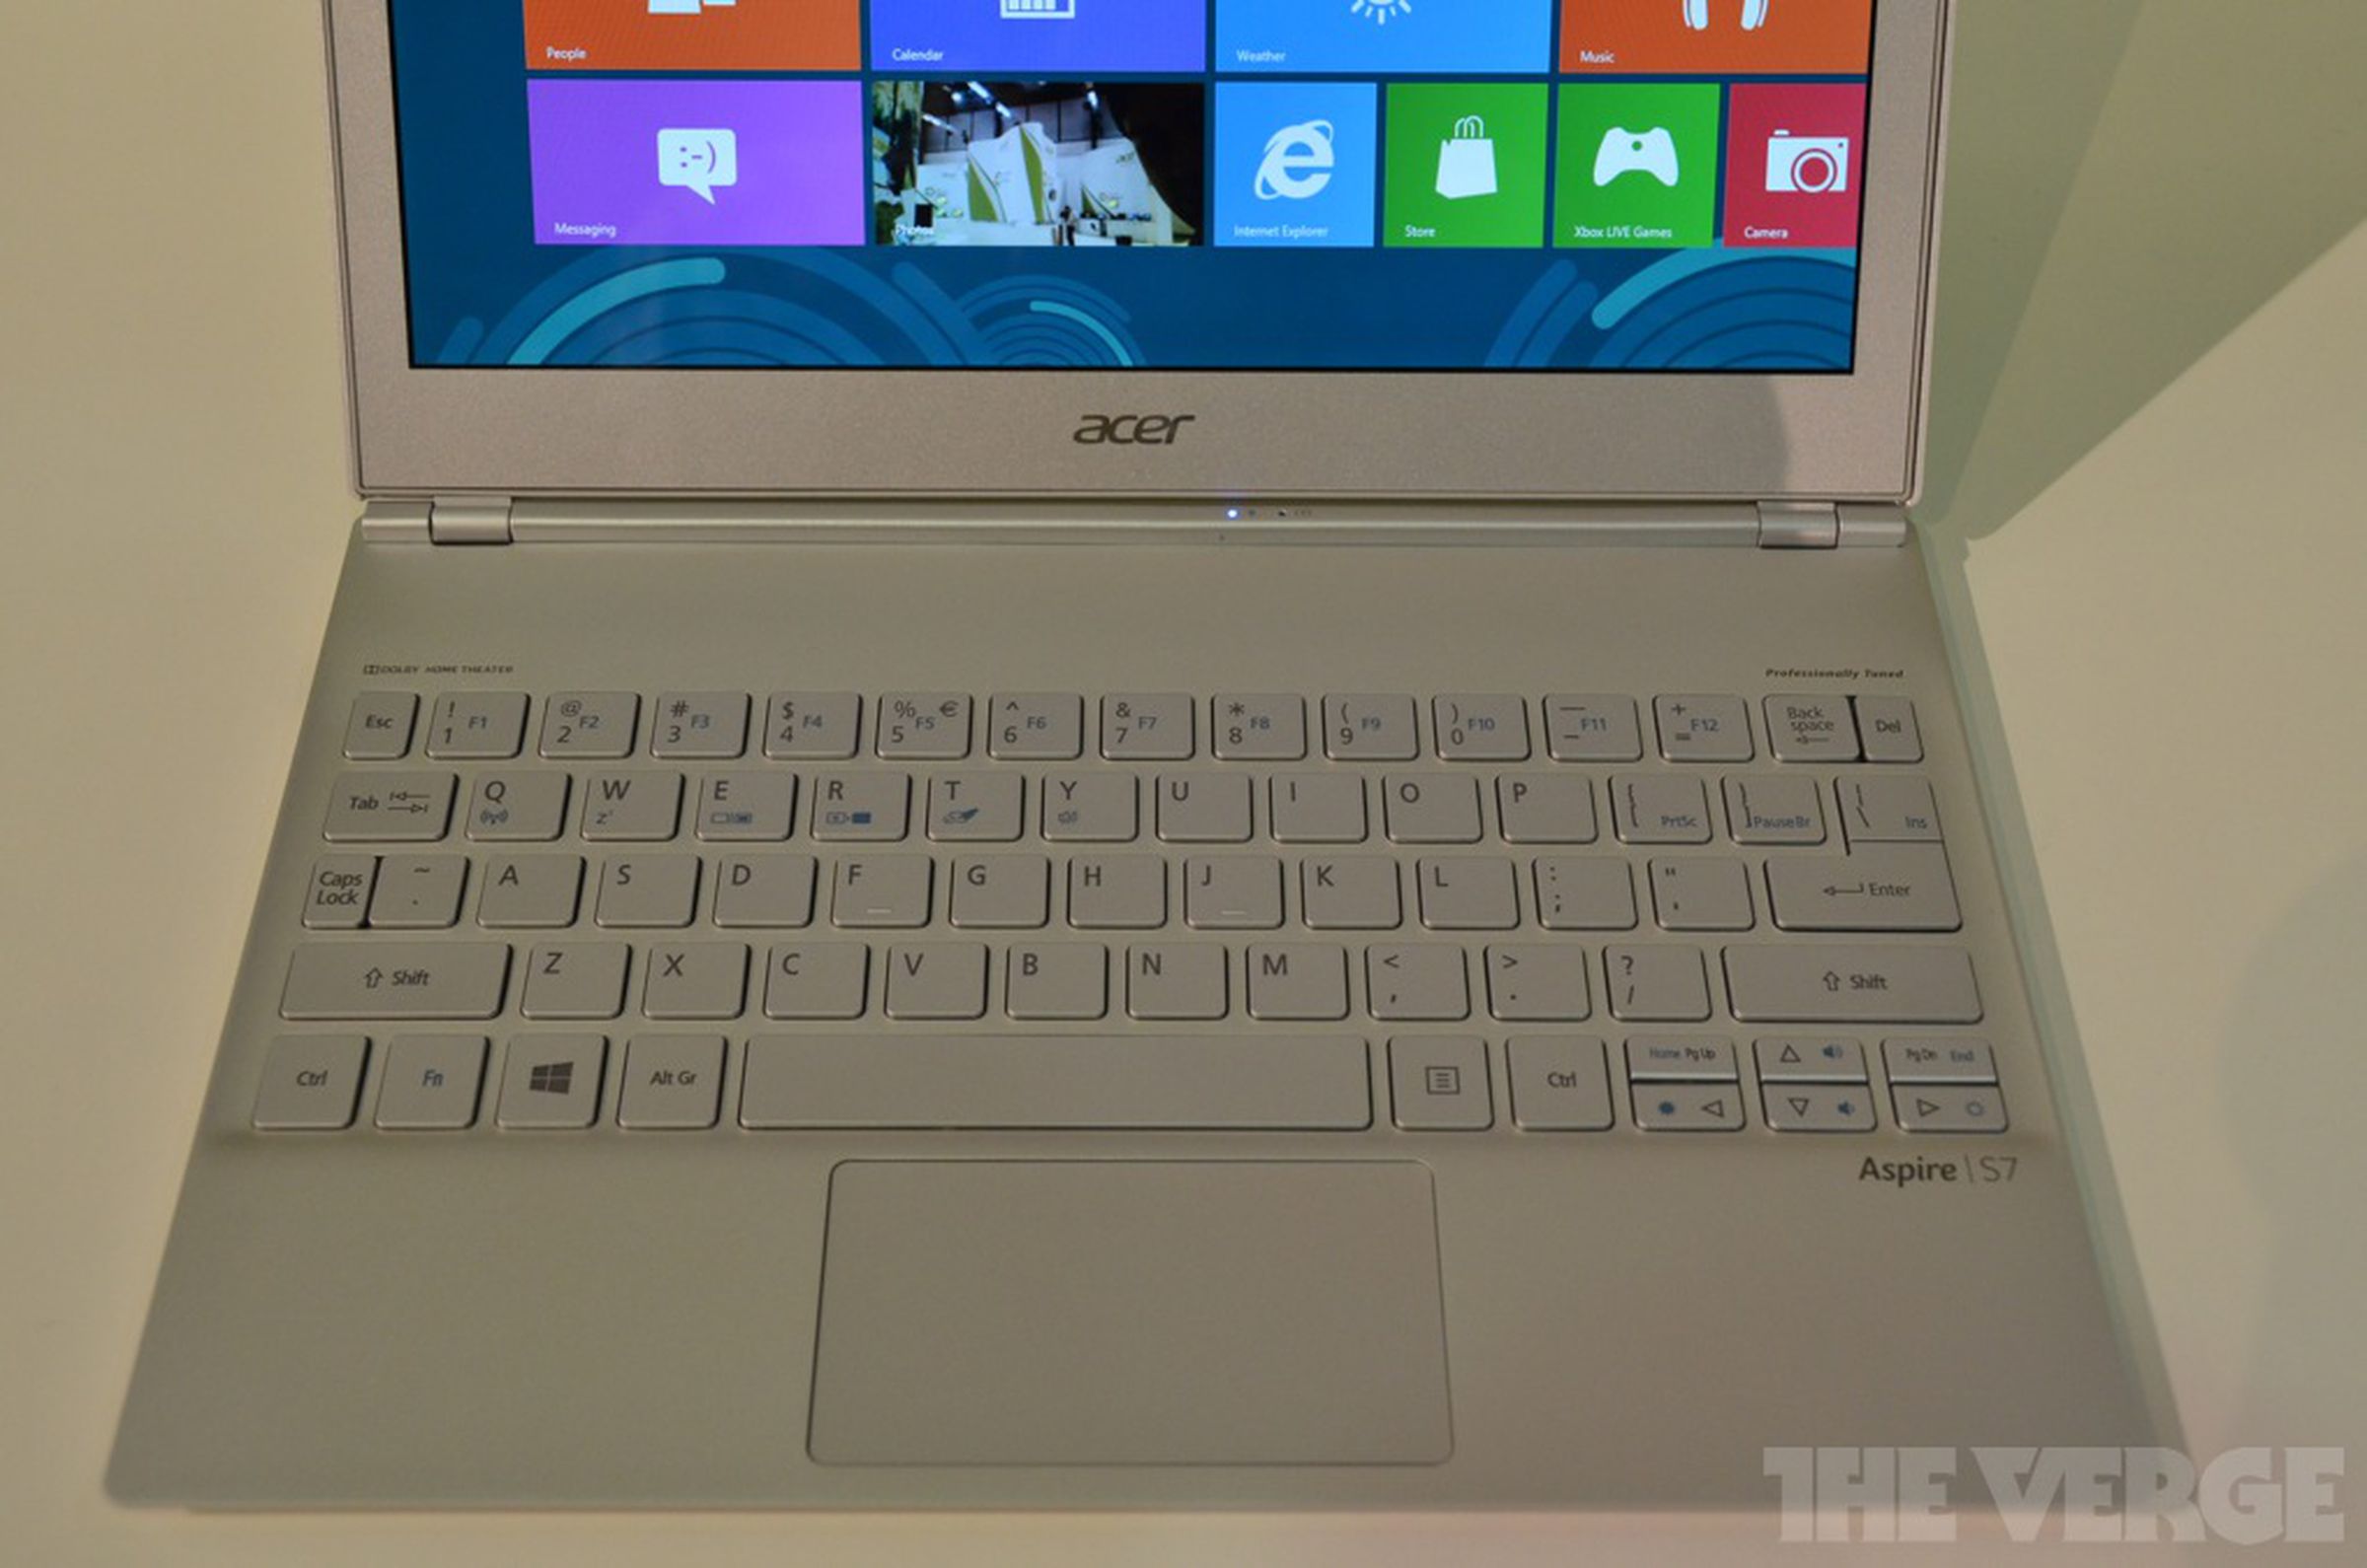 Acer Aspire S7 at IFA 2012